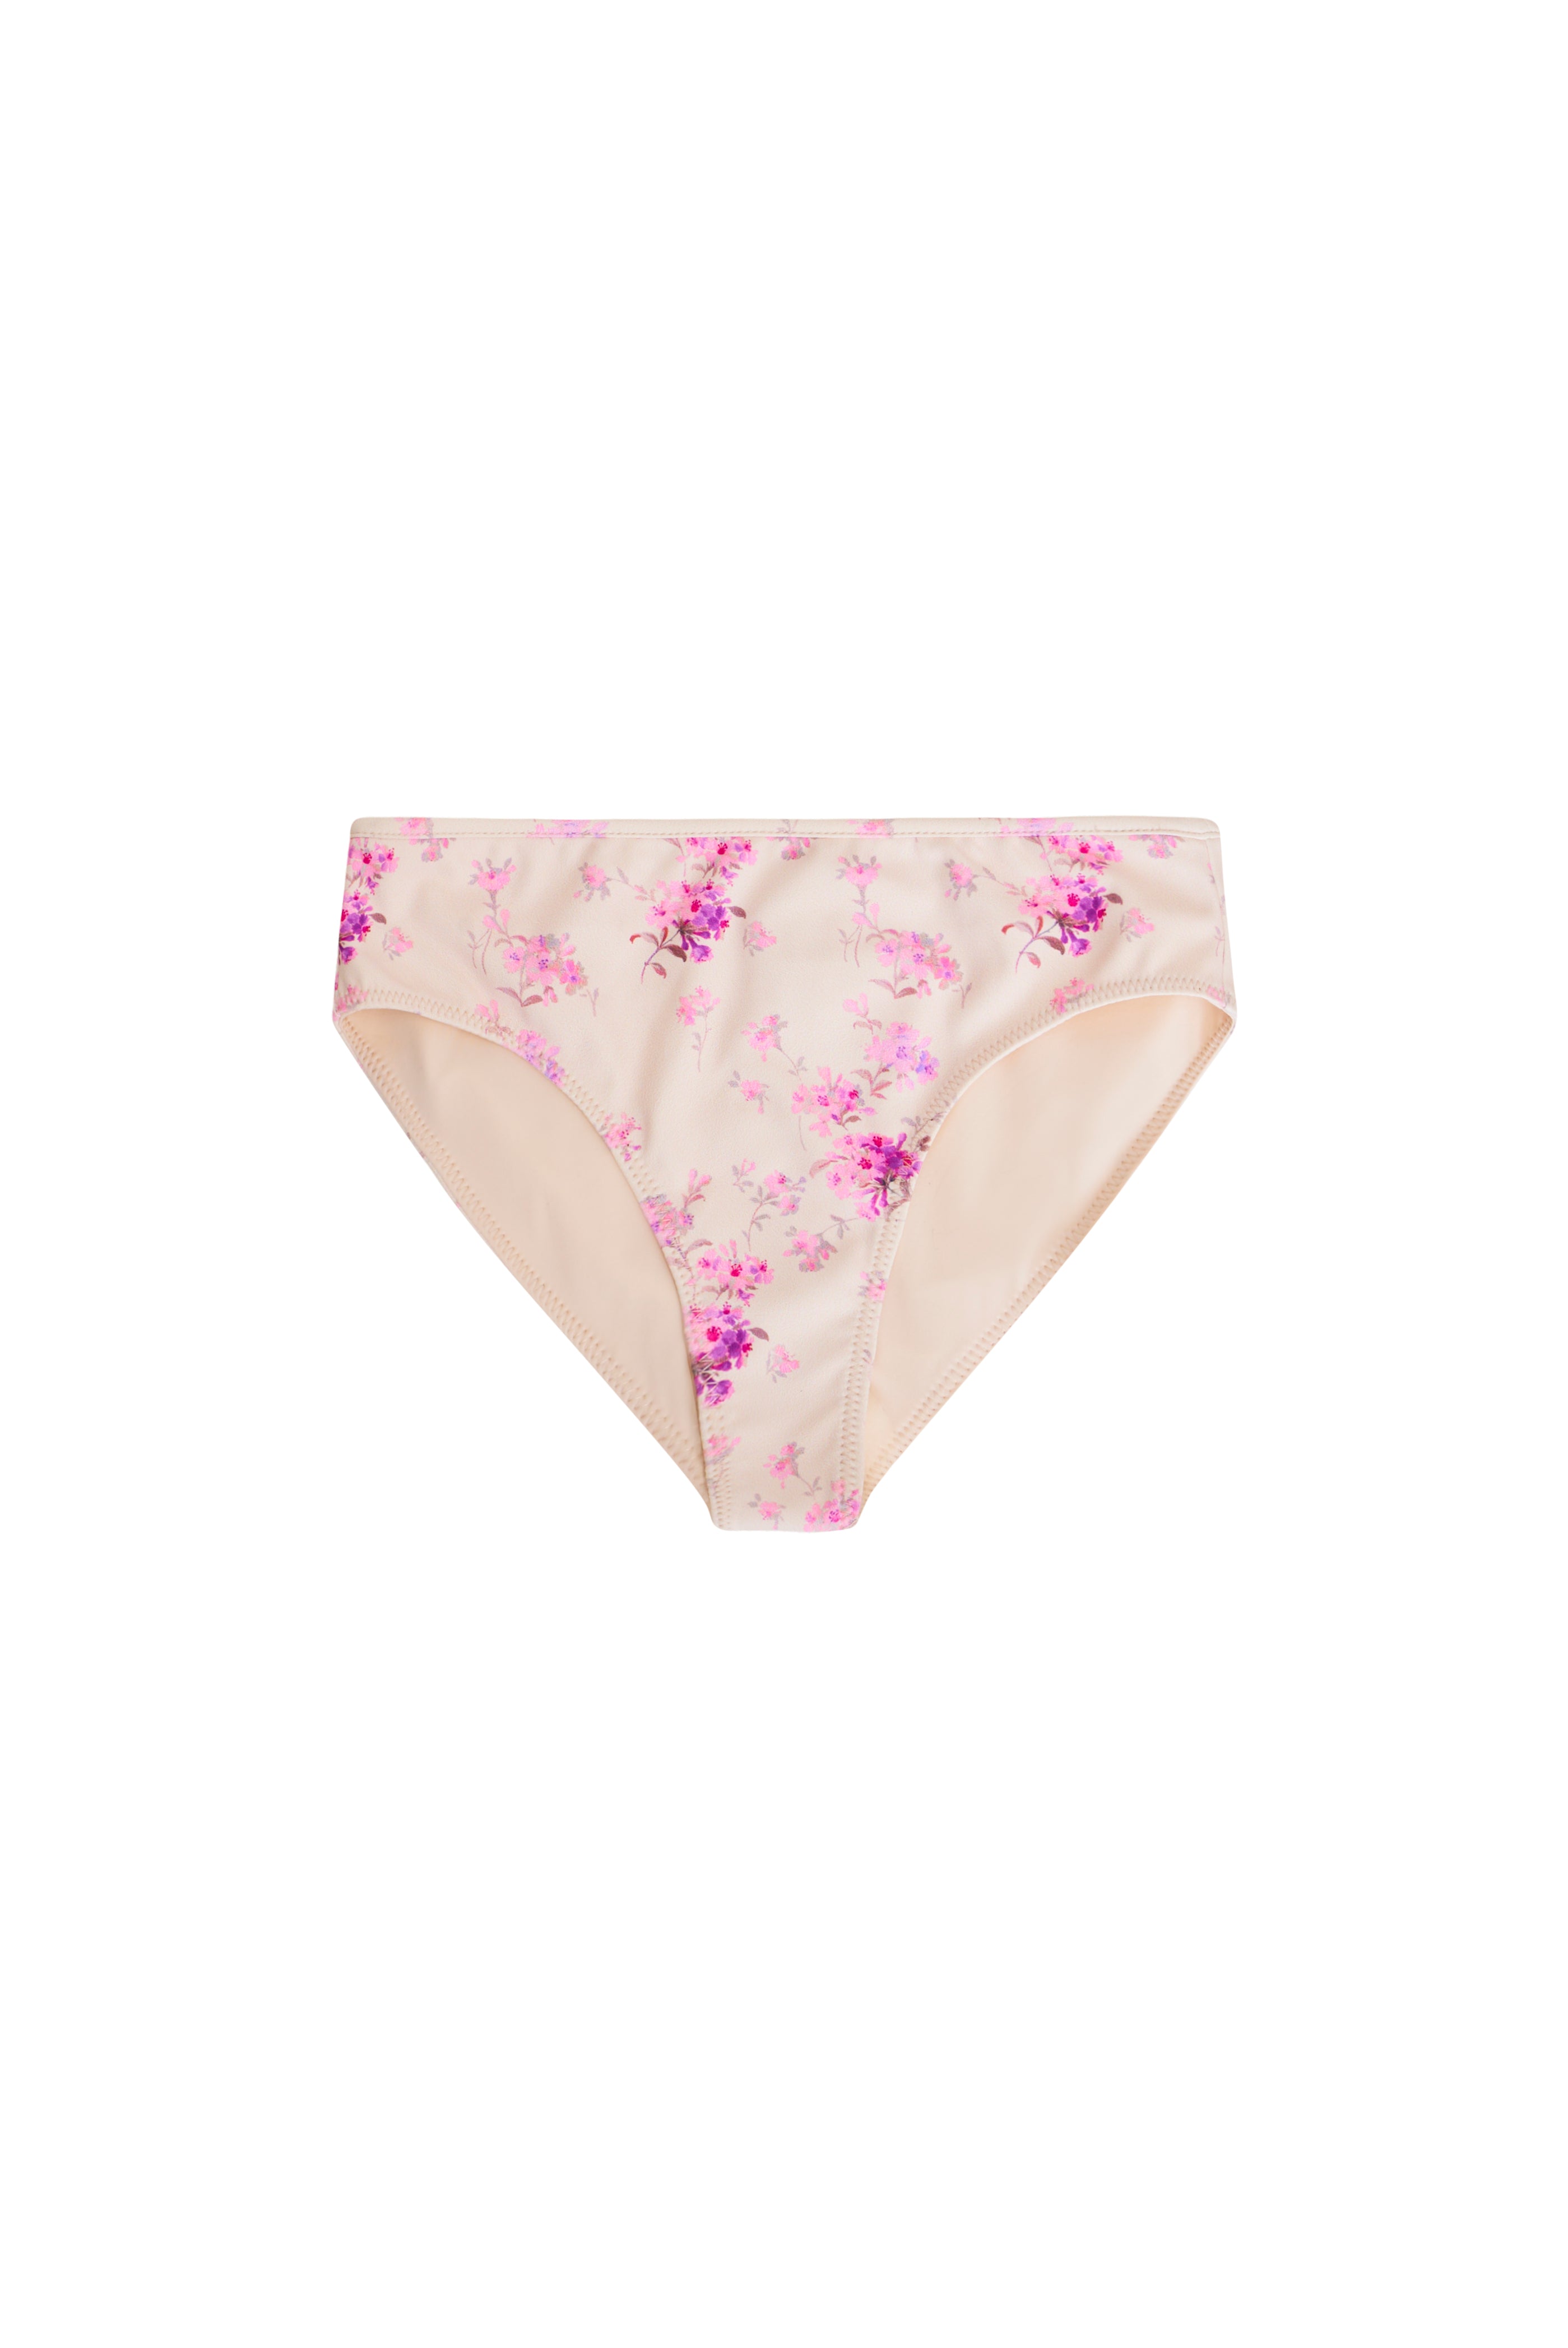 Halter top bikini with self tie detail and dainty floral print.